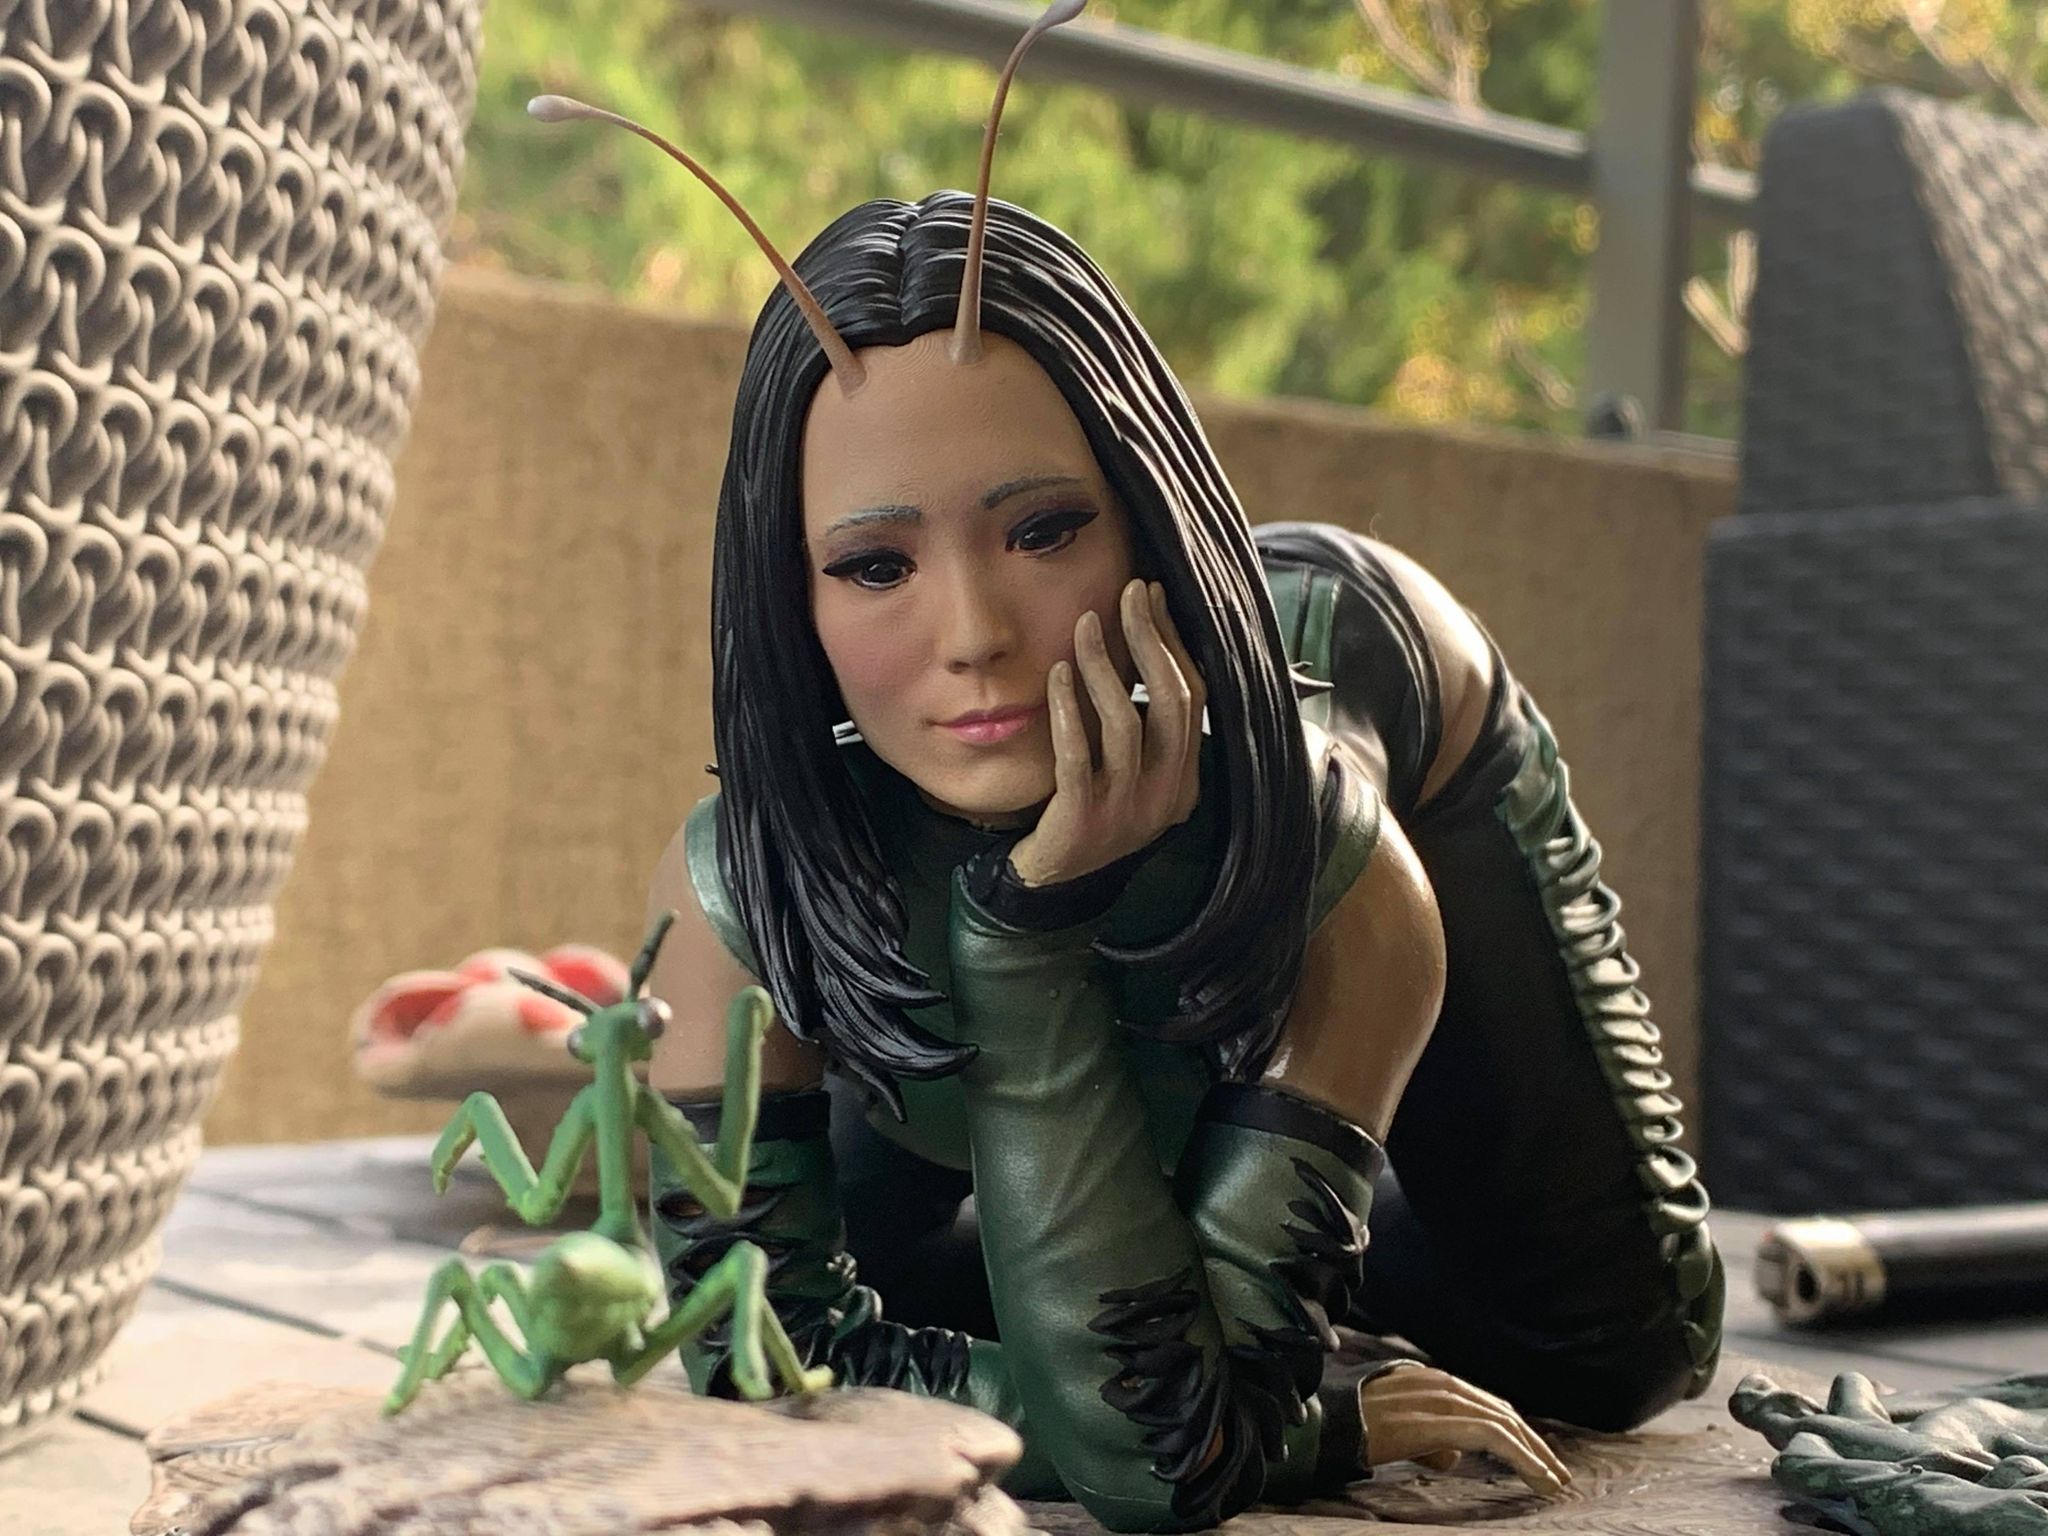 Mantis 2 - Guardians of the Galaxy